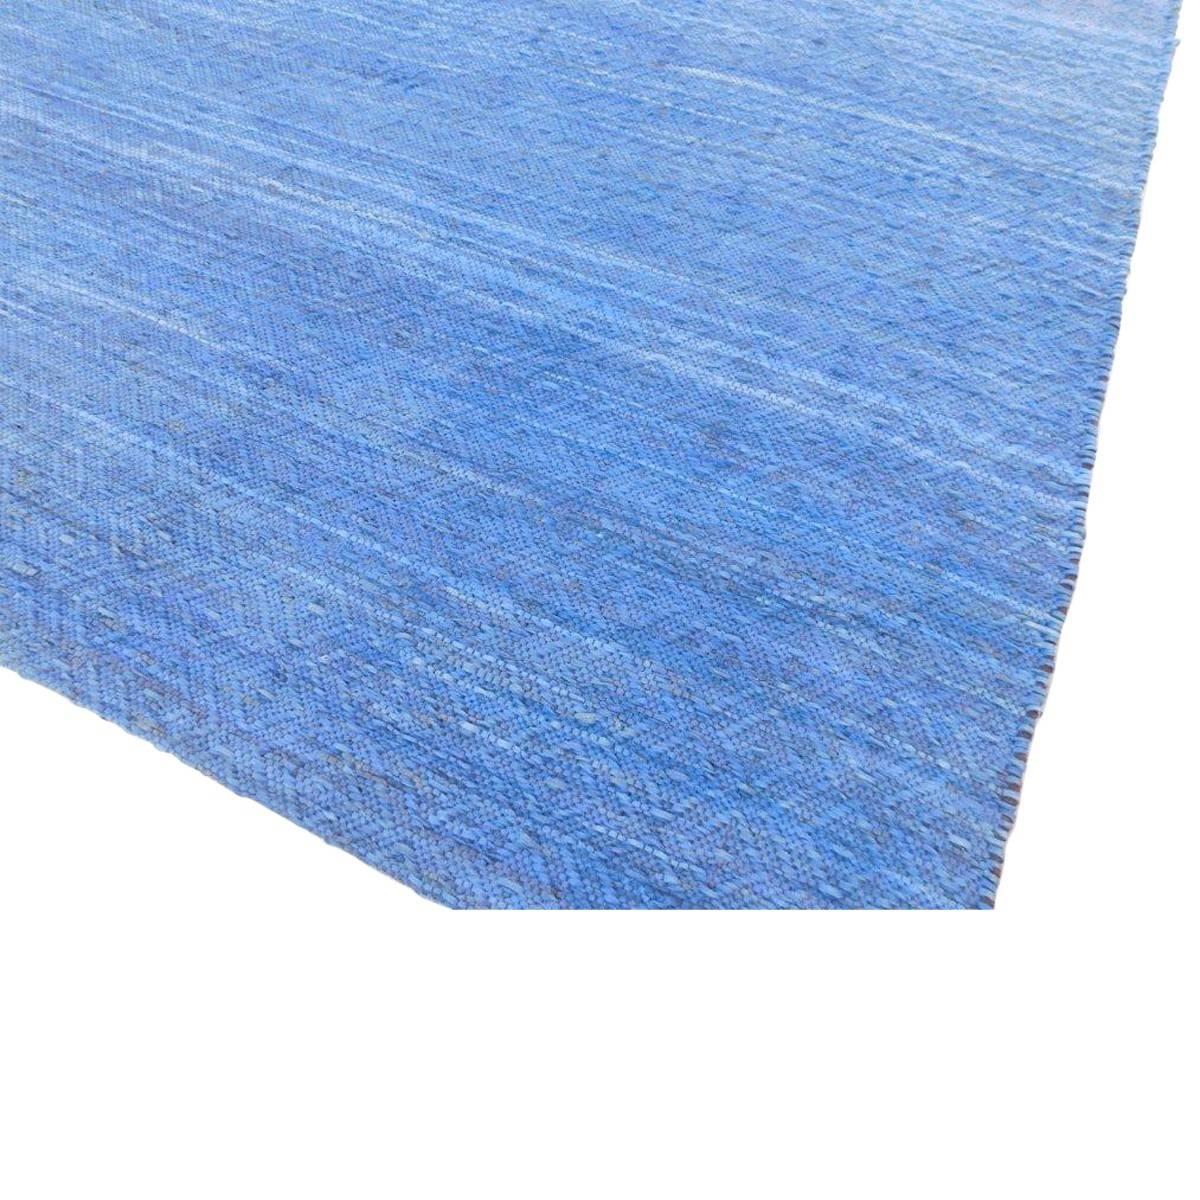 Organic Modern Indigo Denim Blue Suede Contemporary Flat-Weave Woven Rug in Stock For Sale